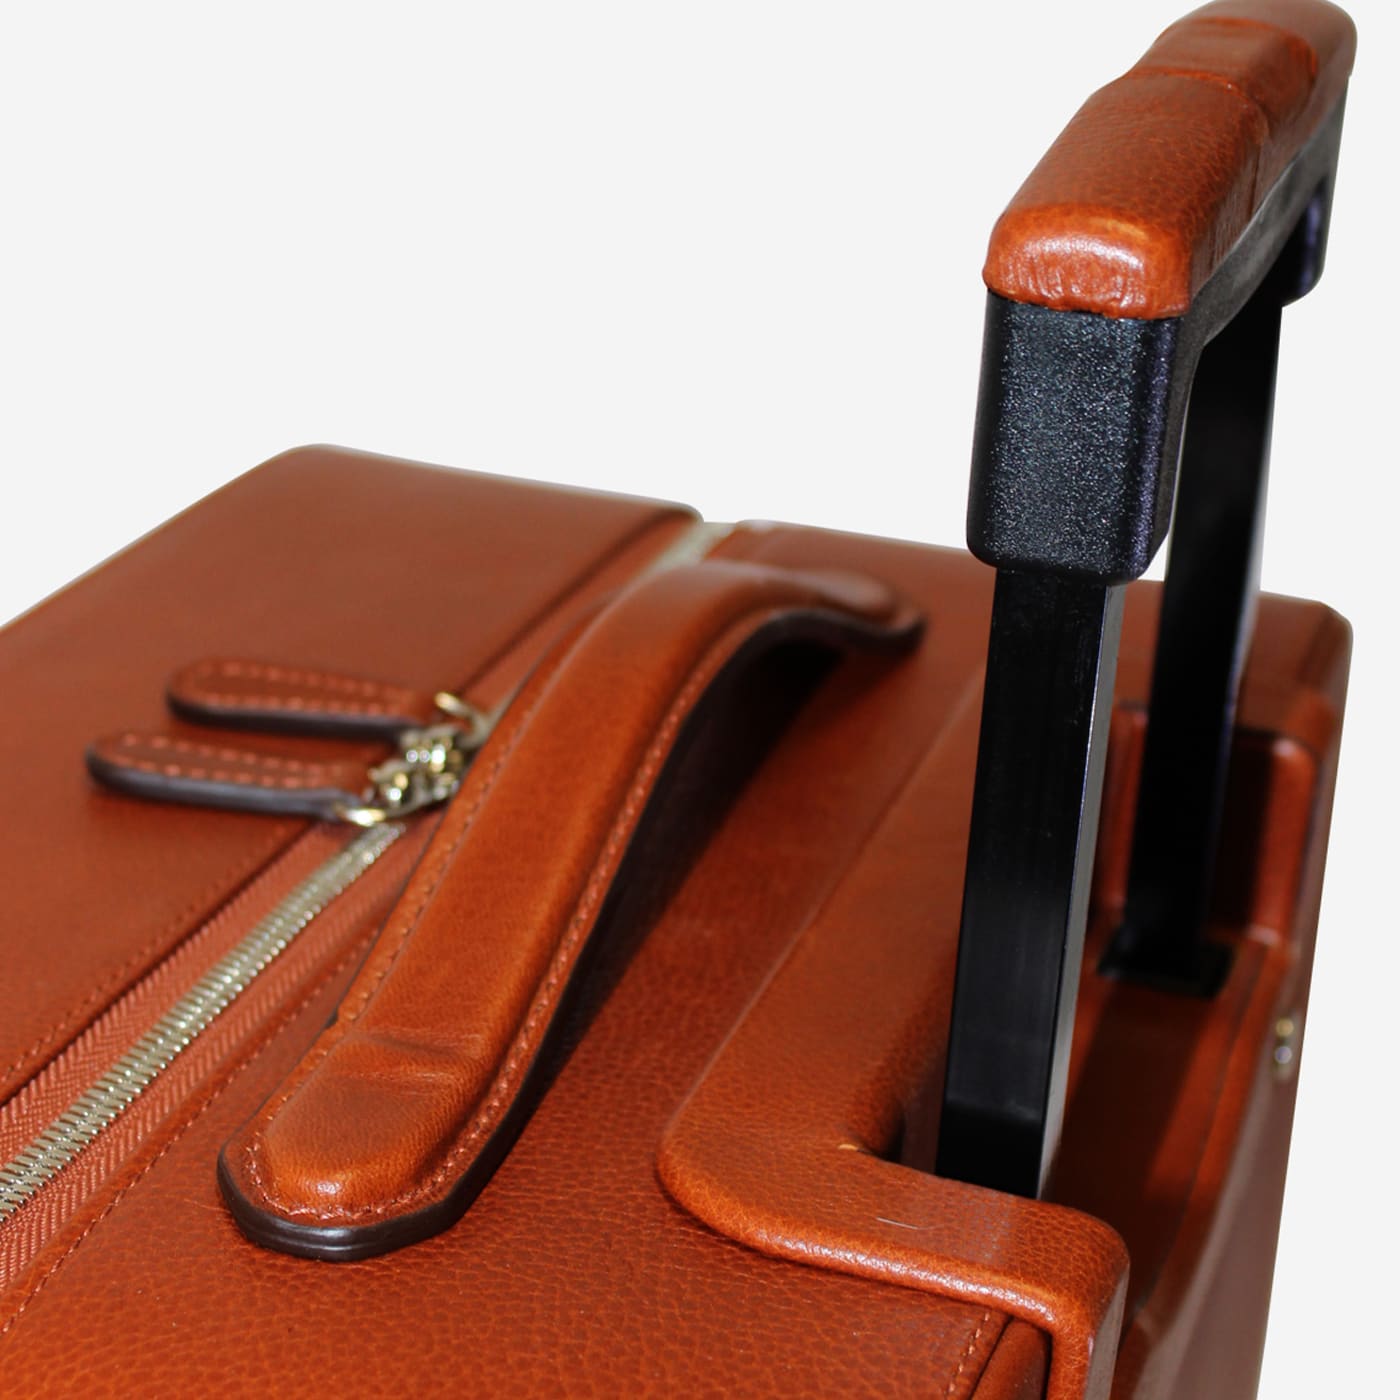 All Road Brown Trolly Suitcase - Terrida